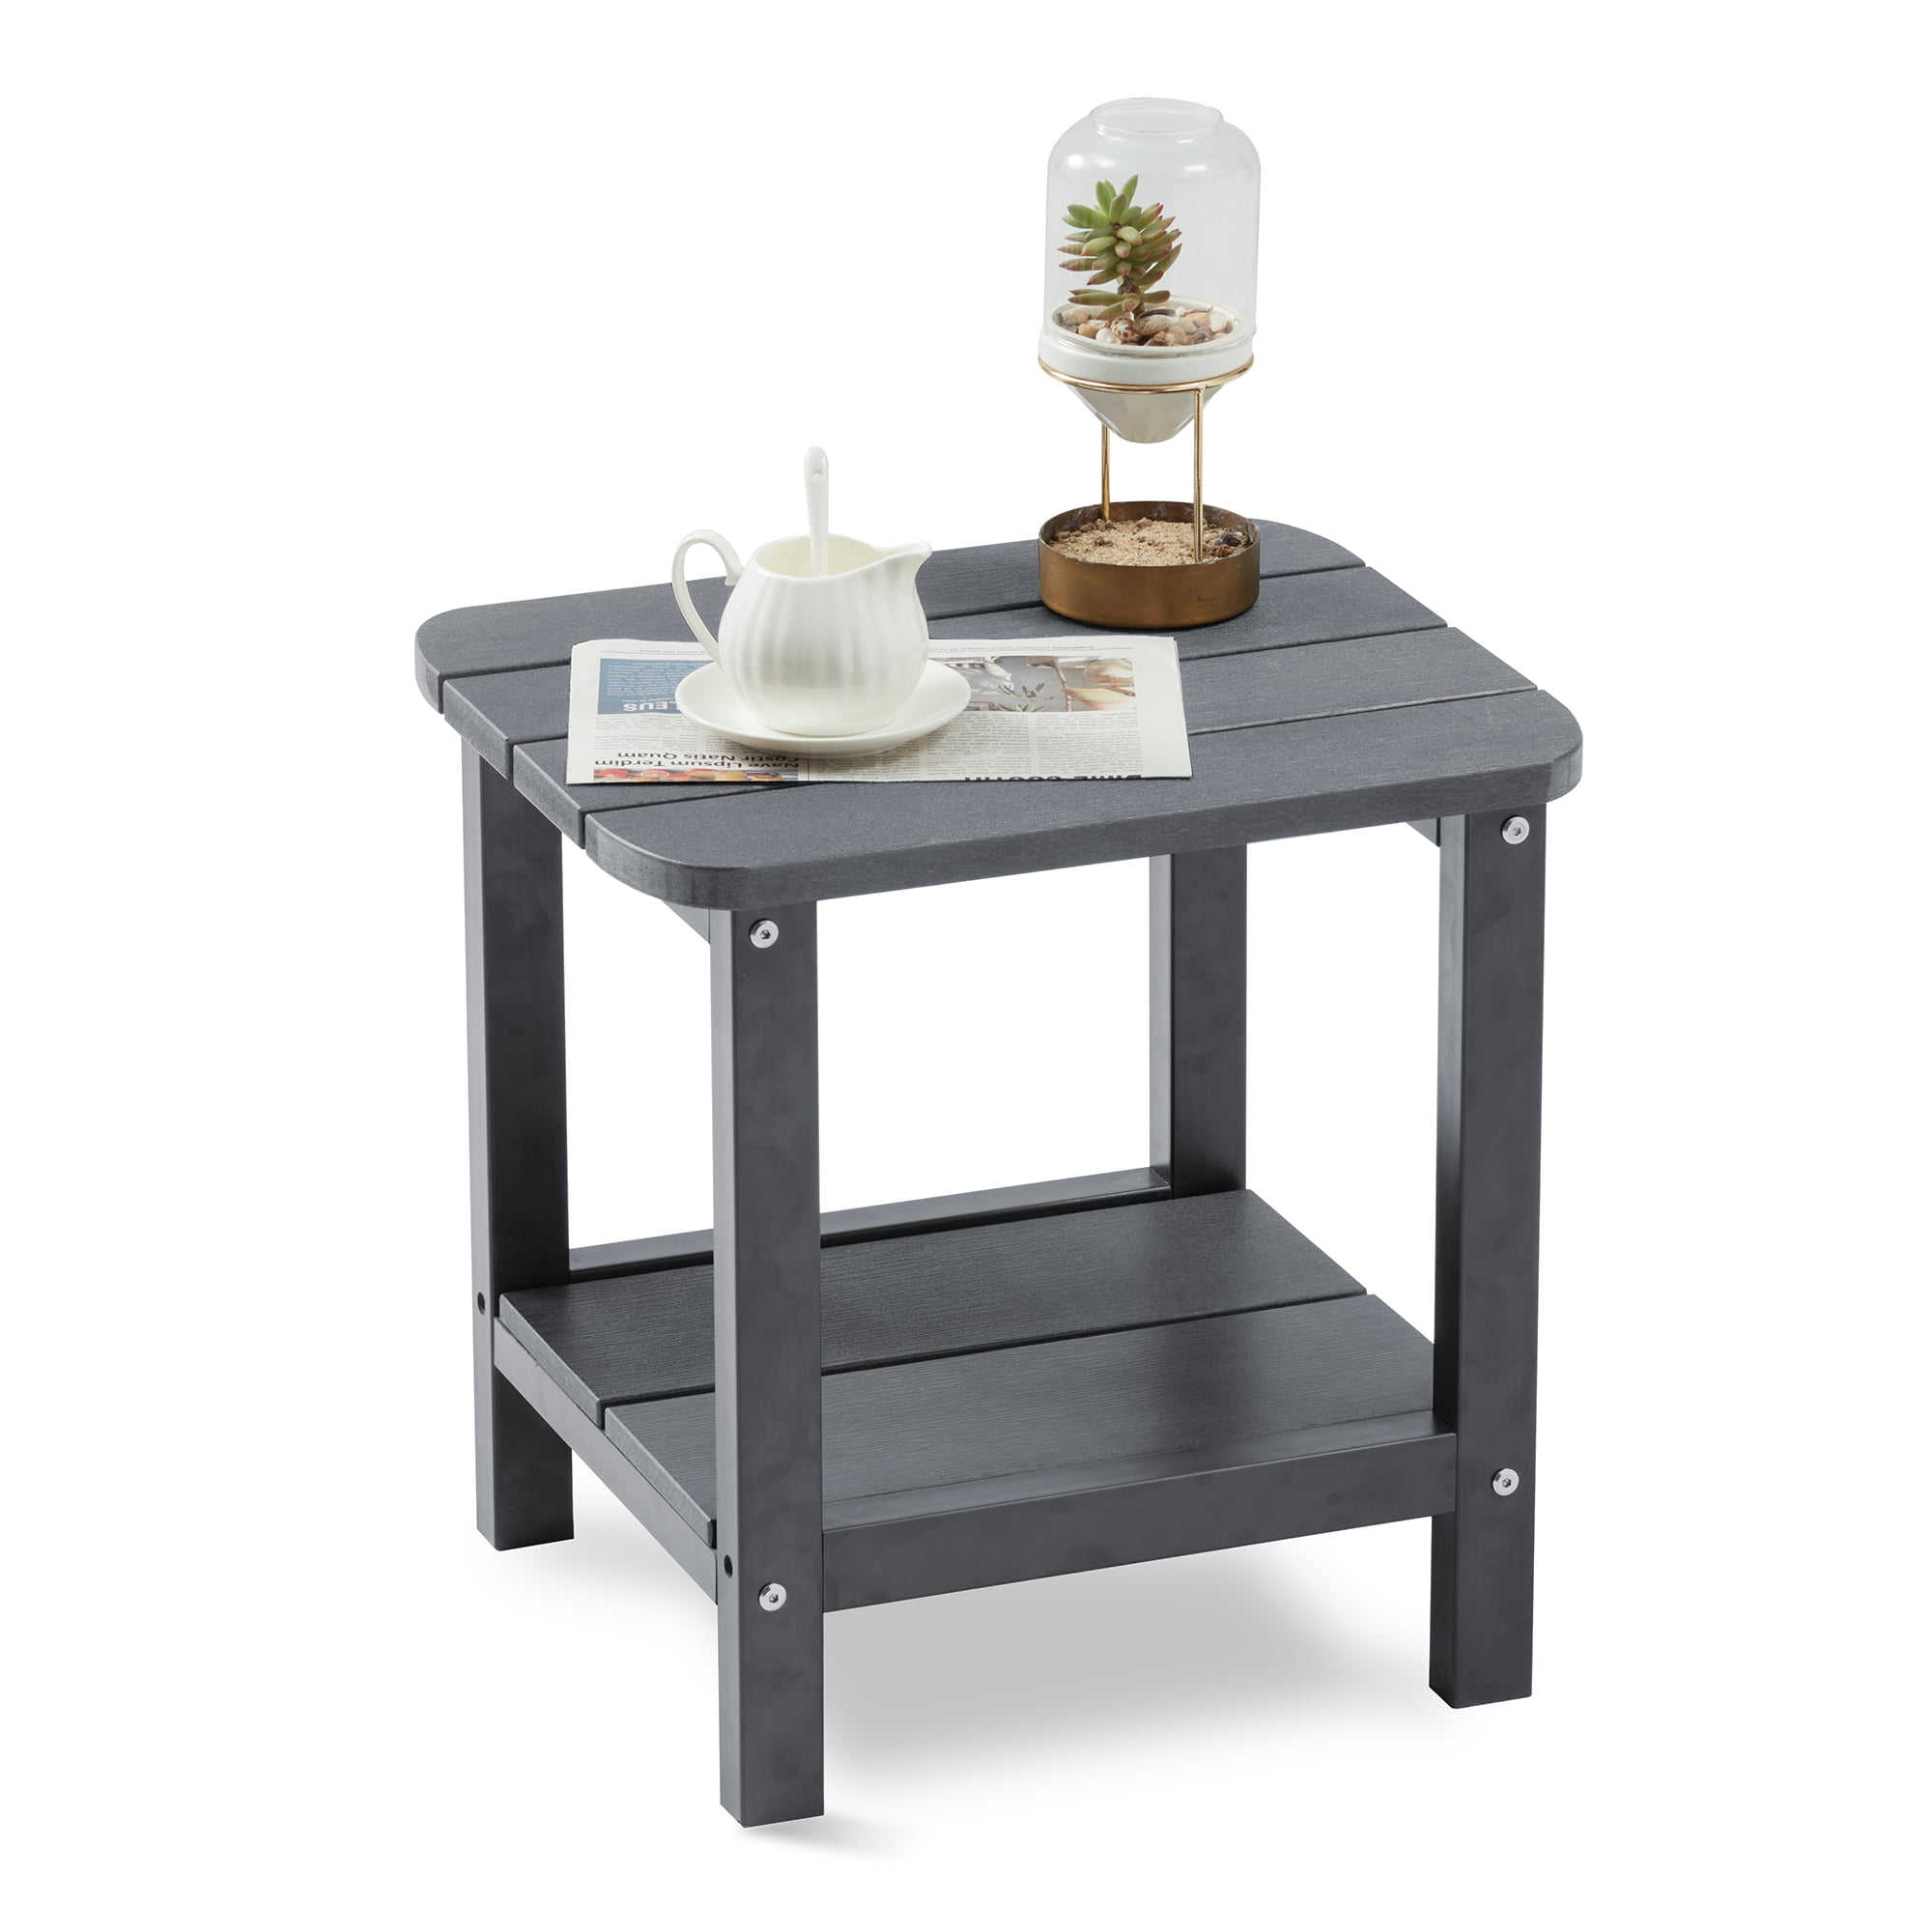 Patio Side Table Coffee Table Tea Table Grey Rattan Outdoor Indoor Square Table Balcony Small End Table